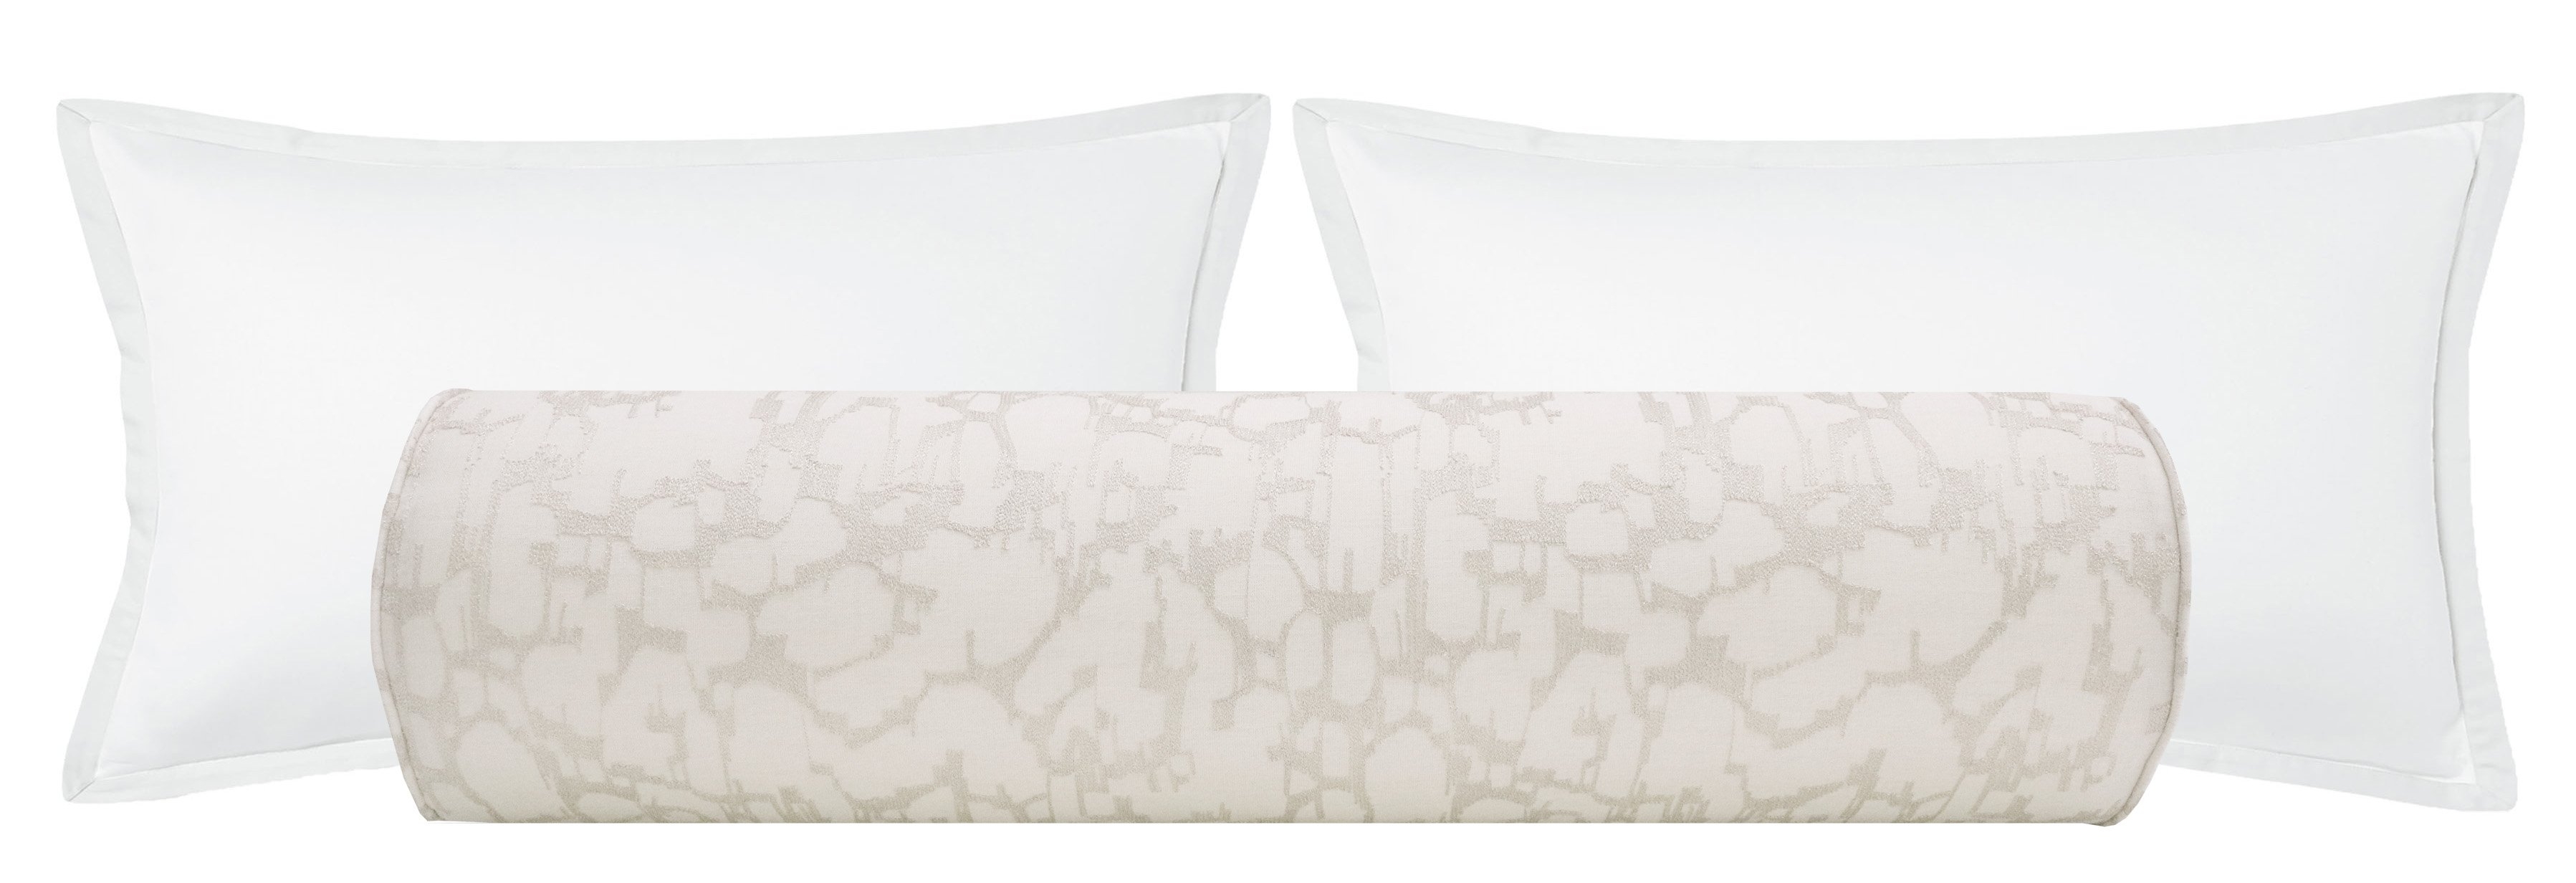 THE BOLSTER :: PASTICHE LINEN // ALABASTER - KING // 9" X 48" - Image 0